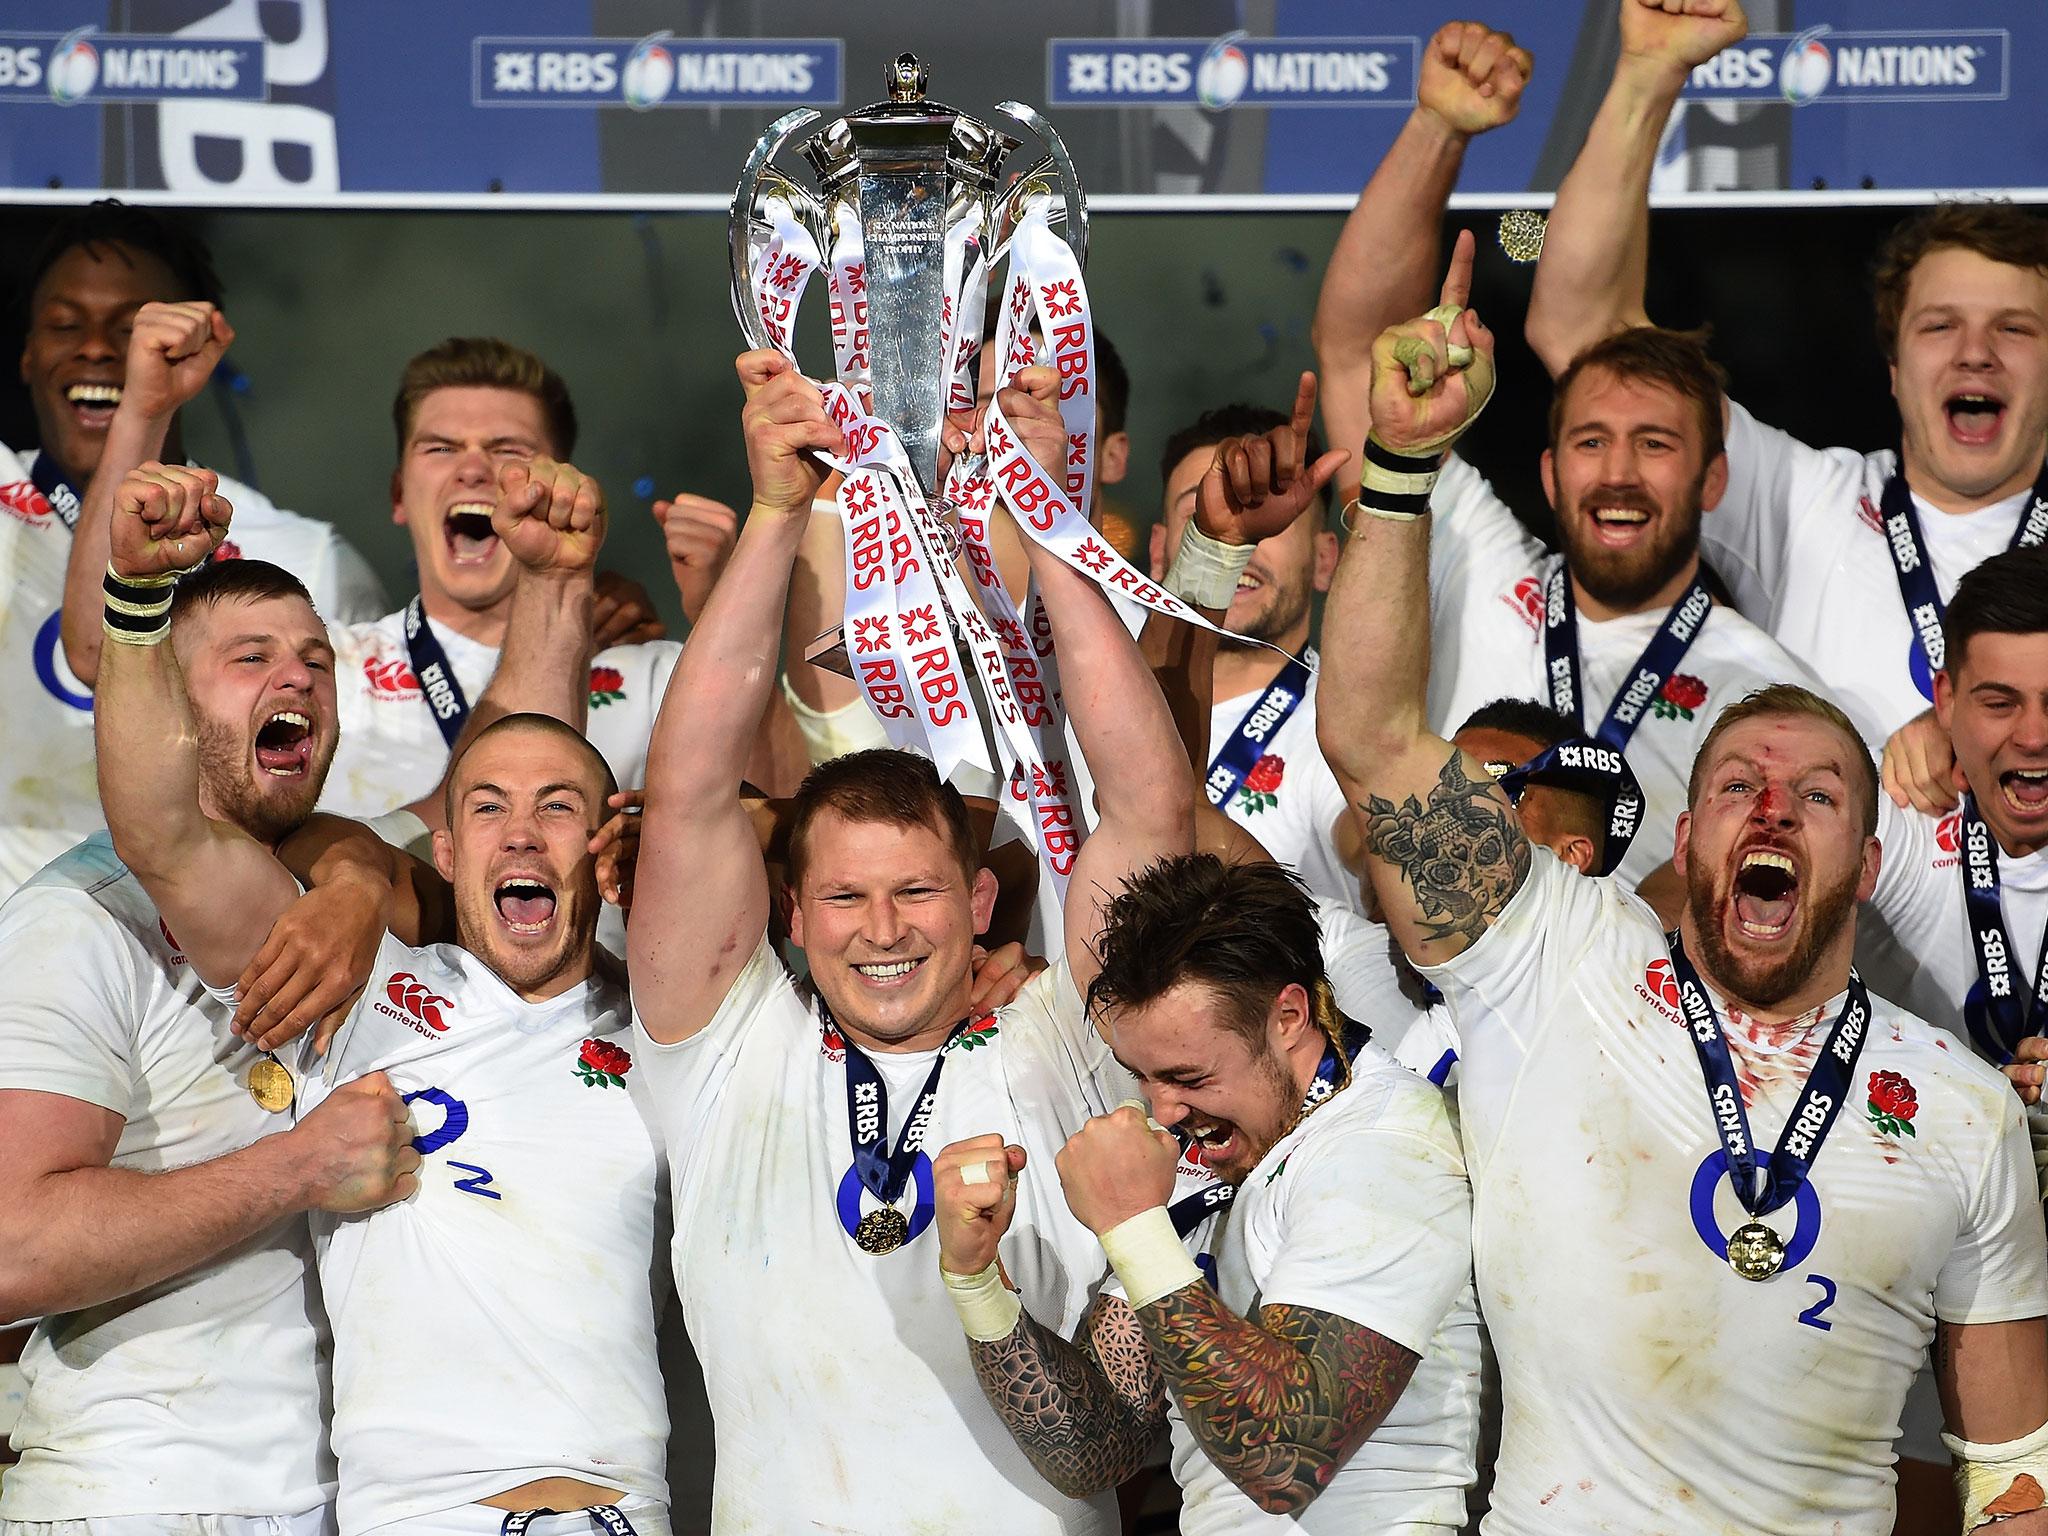 The Six Nations will use a bonus point scoring system for the first time in 2017